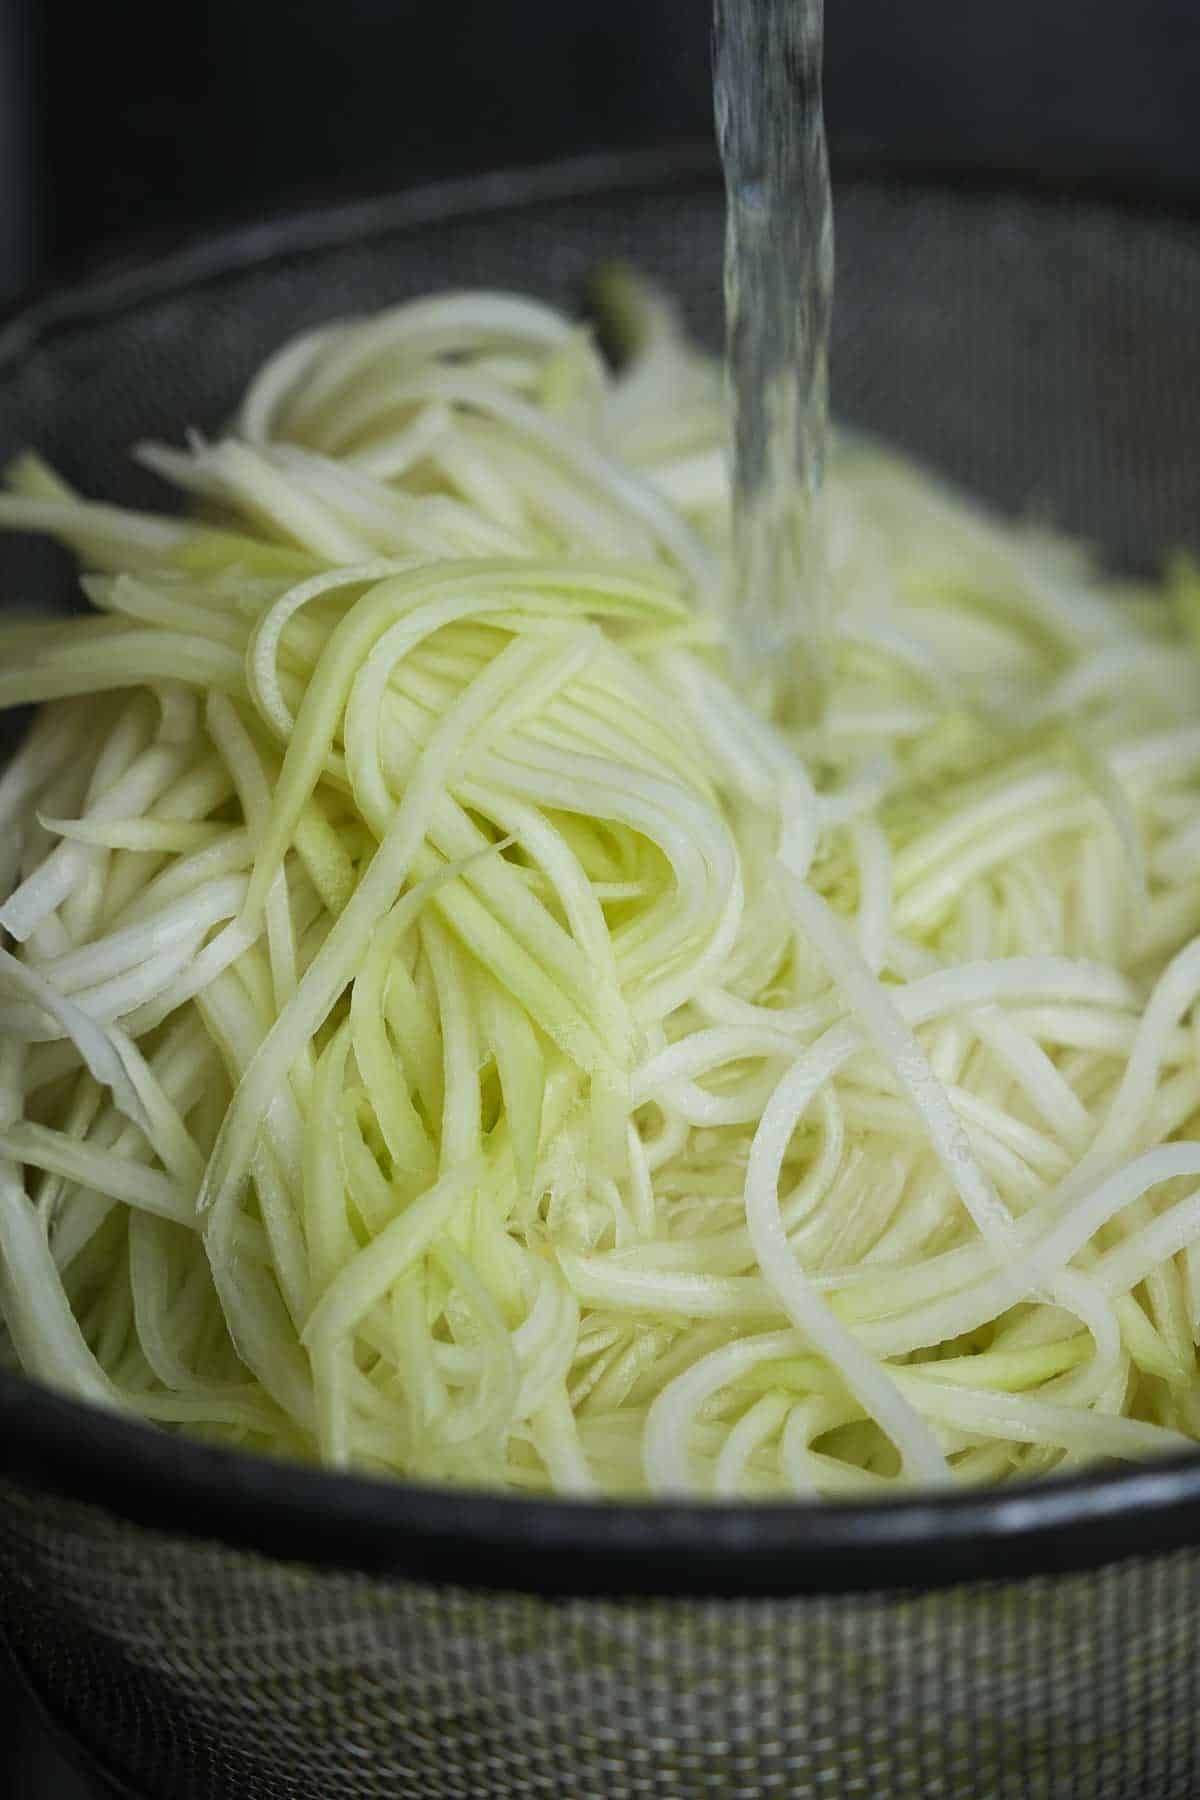 Julienne cut green papaya shreds are being rinsed in a strainer.